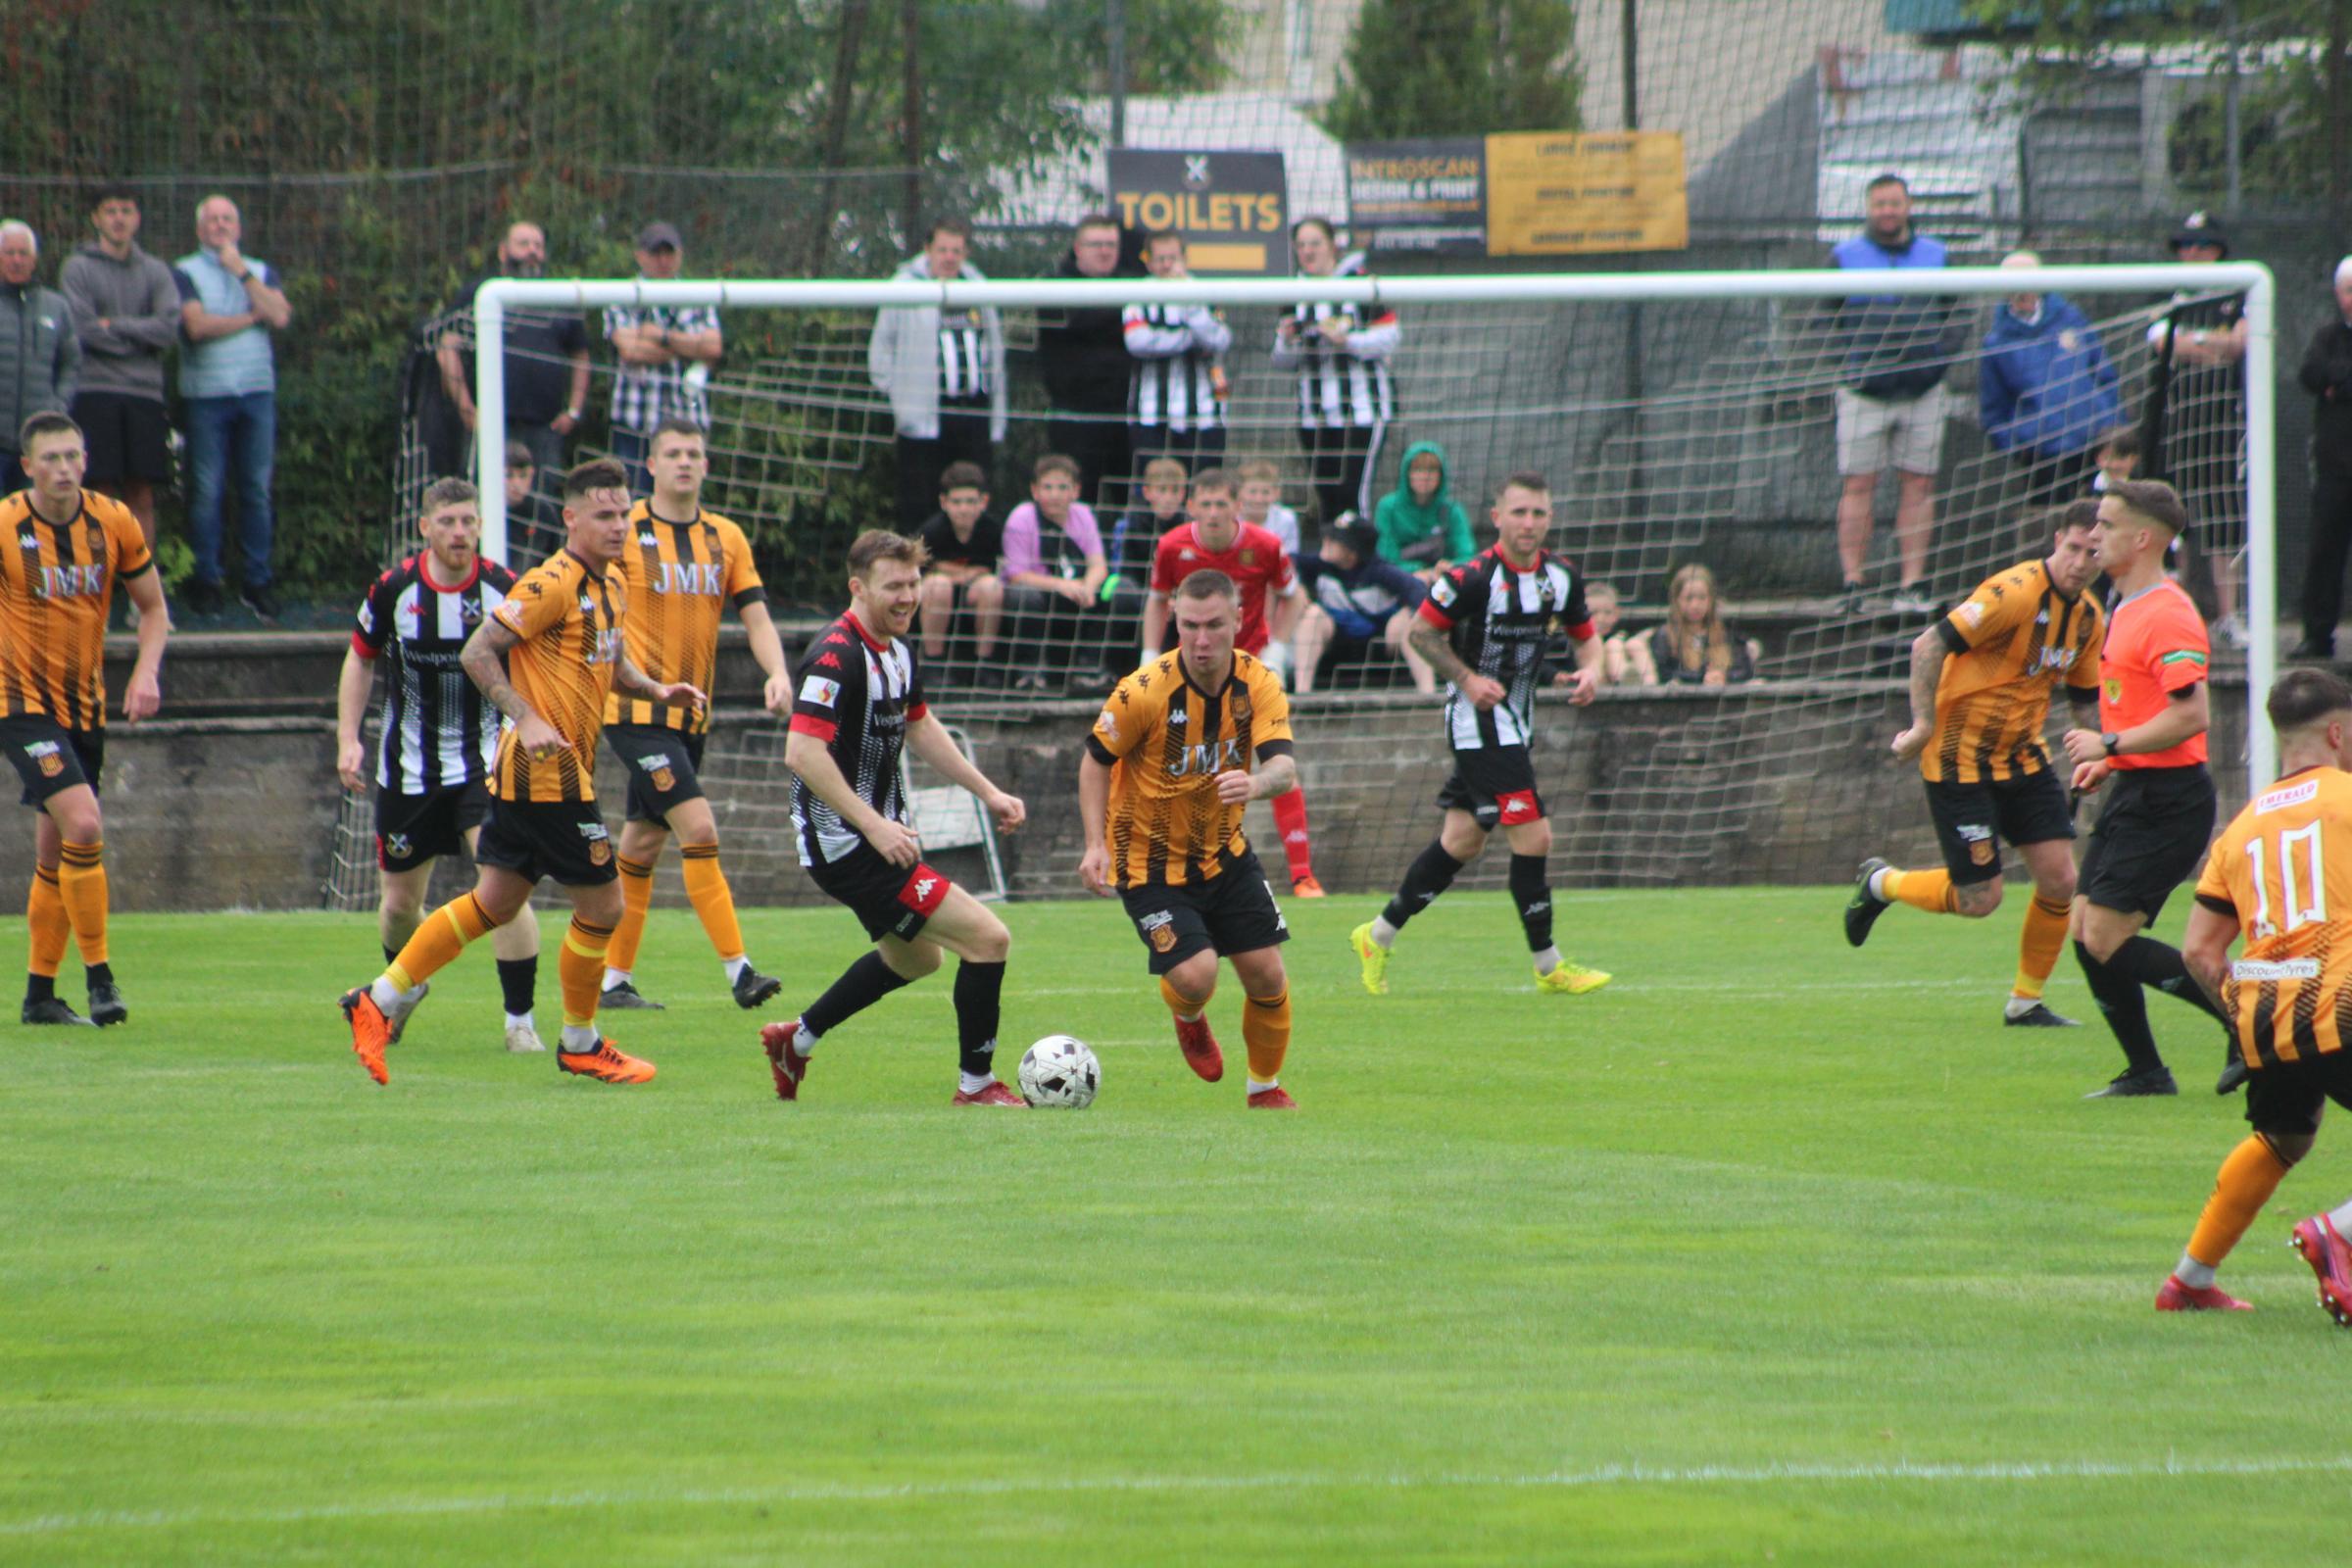 Auchinleck Talbot lost 1-0 to Pollok on the opening day of the WoSFL season on July 29